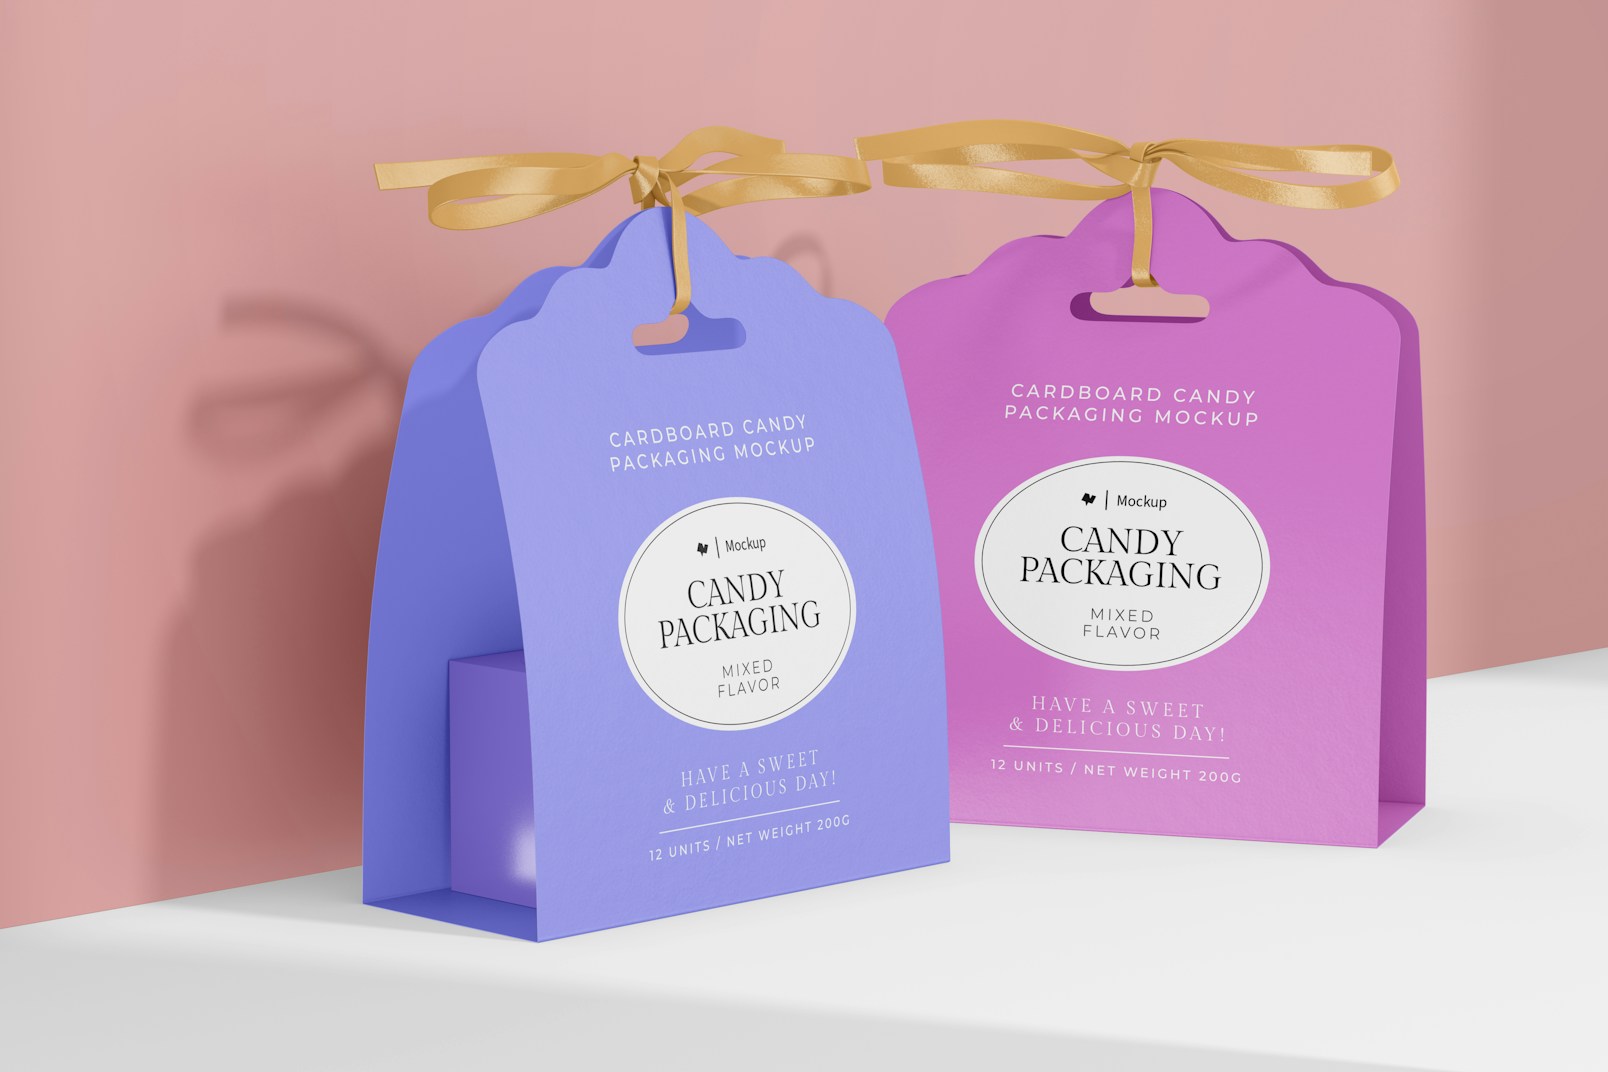 Cardboard Candy Packaging Mockup, Right View